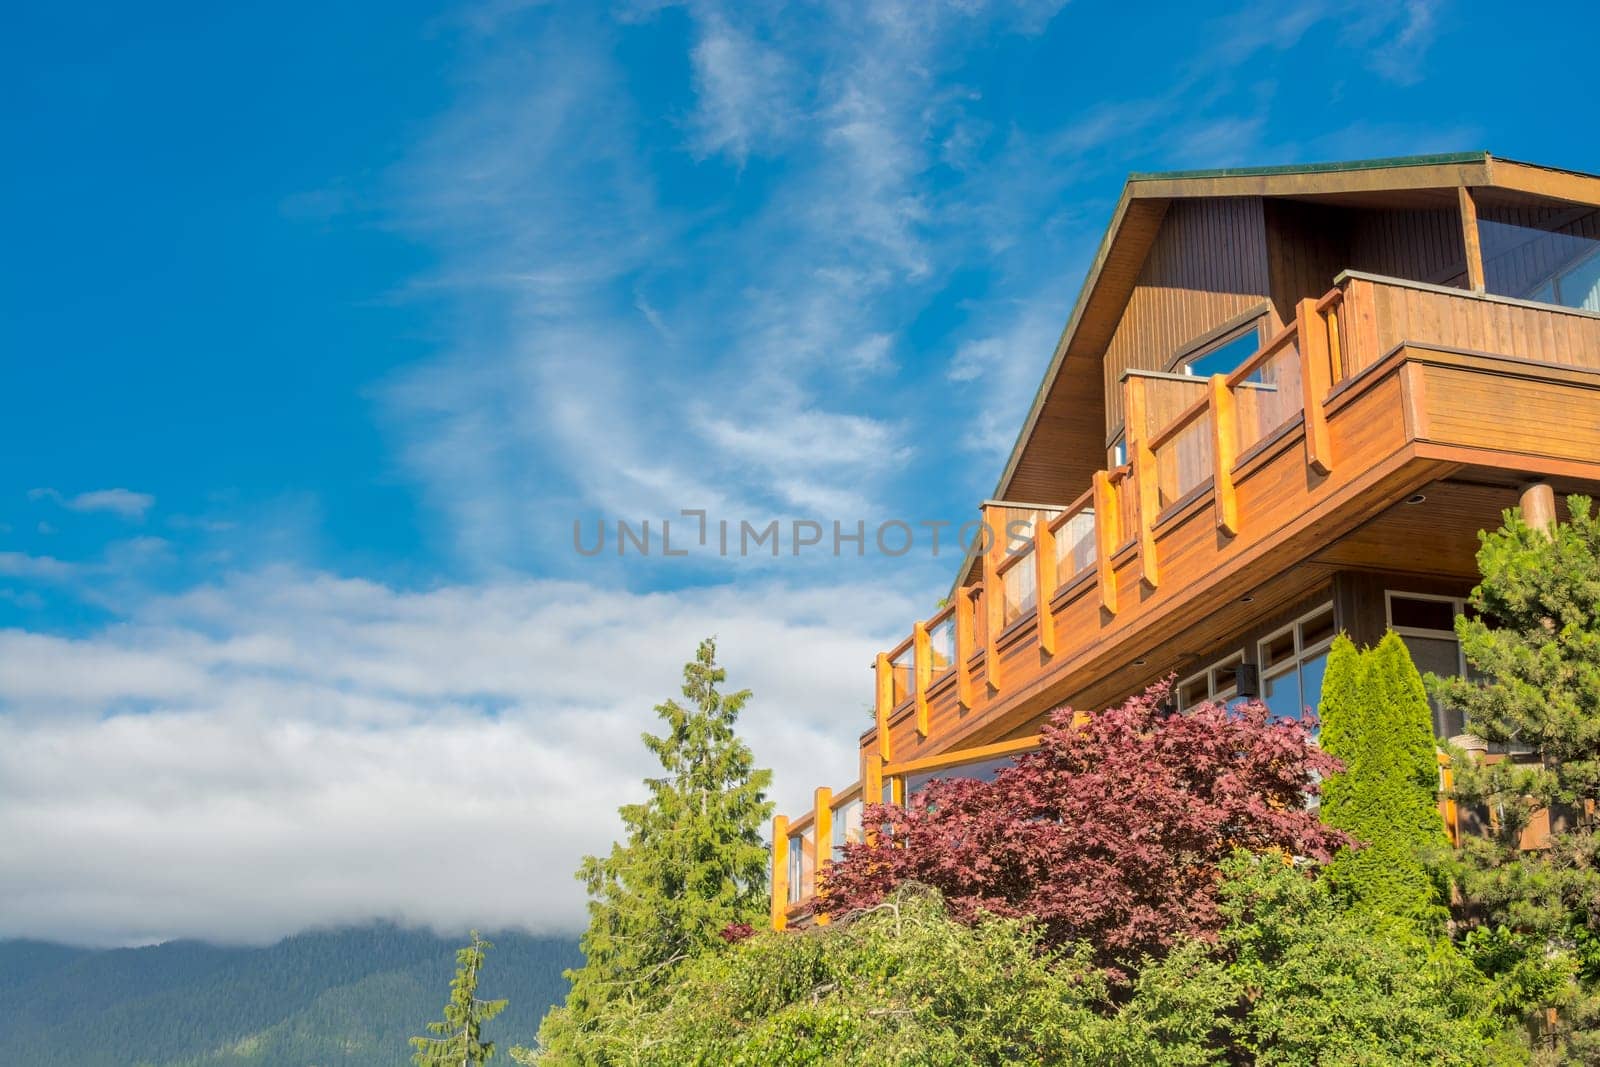 Top of wooden residential house on blue sky background.